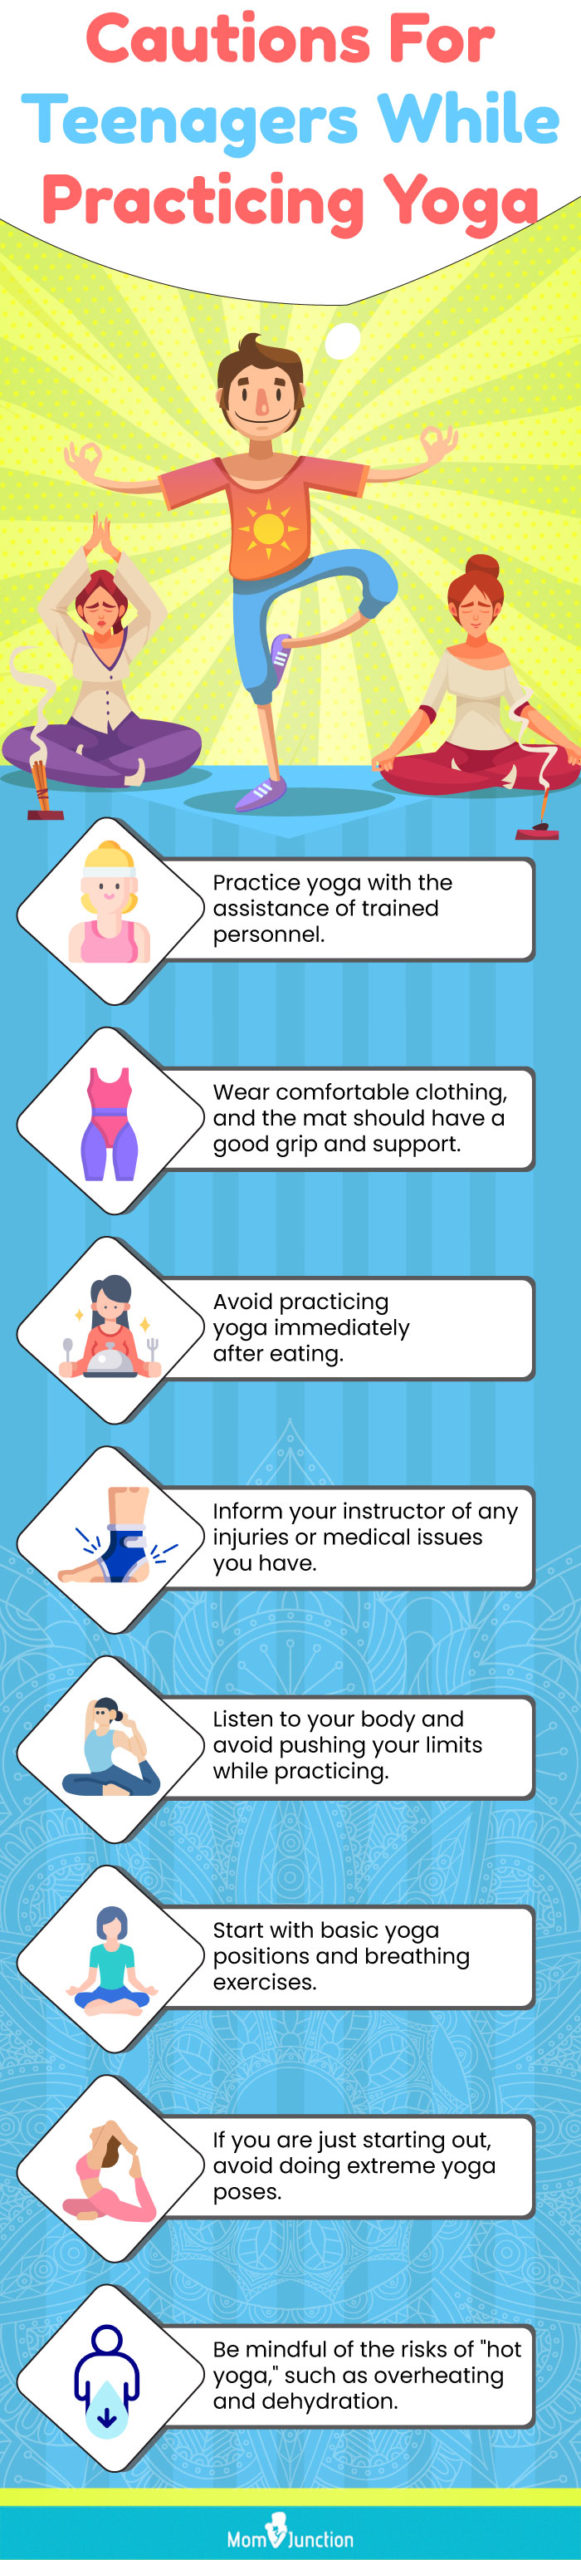 cautions for teenagers while practicing yoga (infographic)